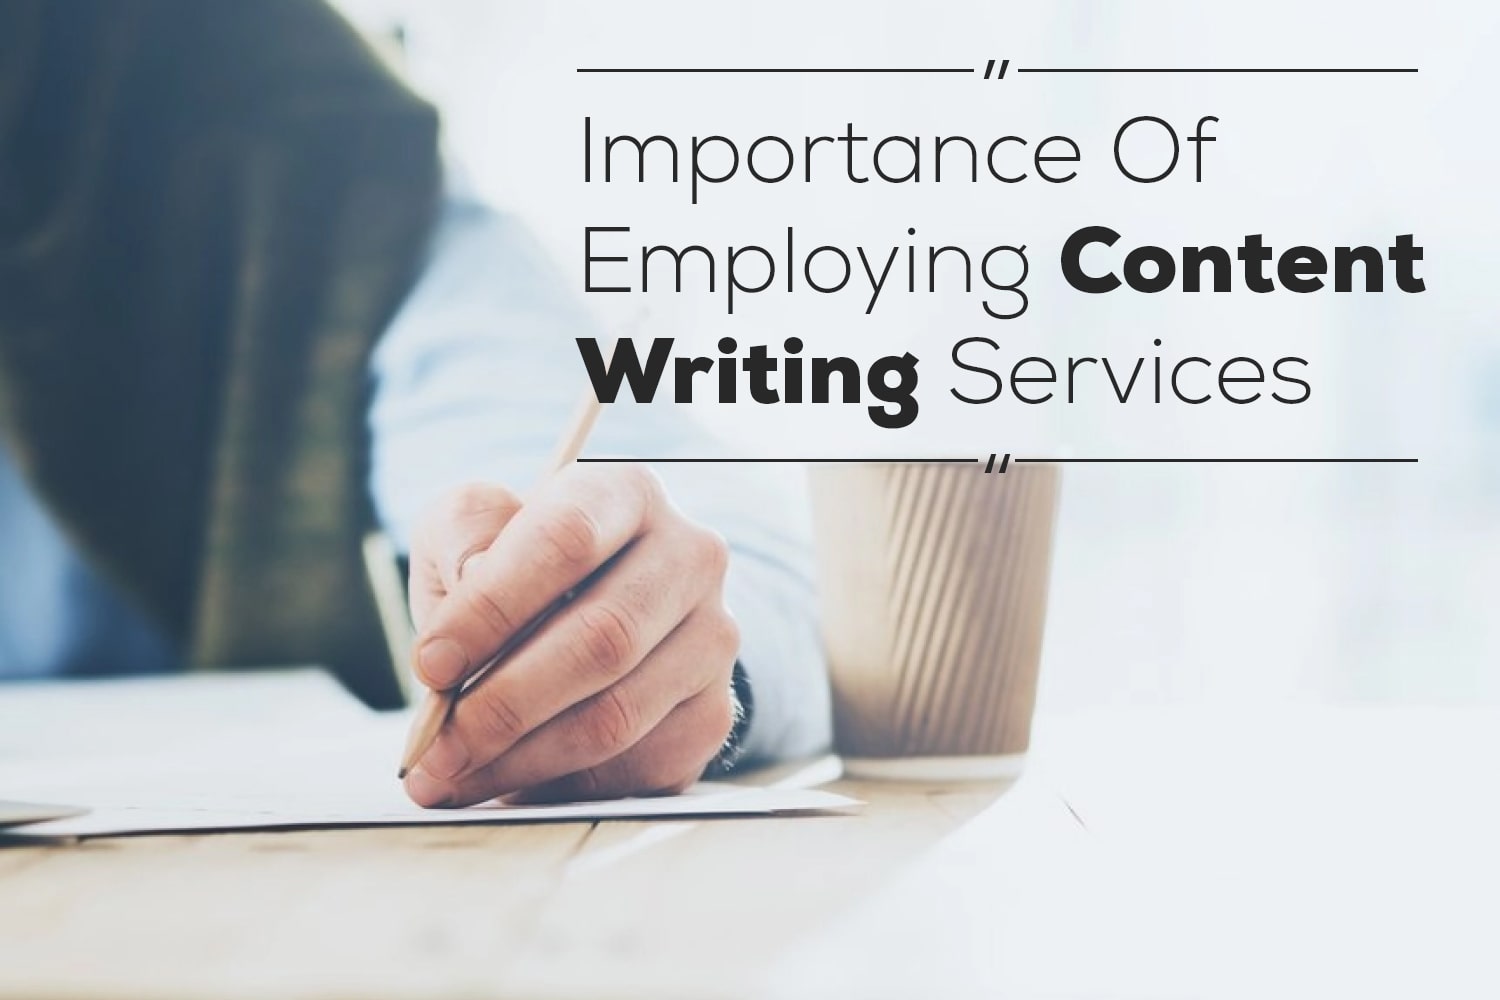 writing services company